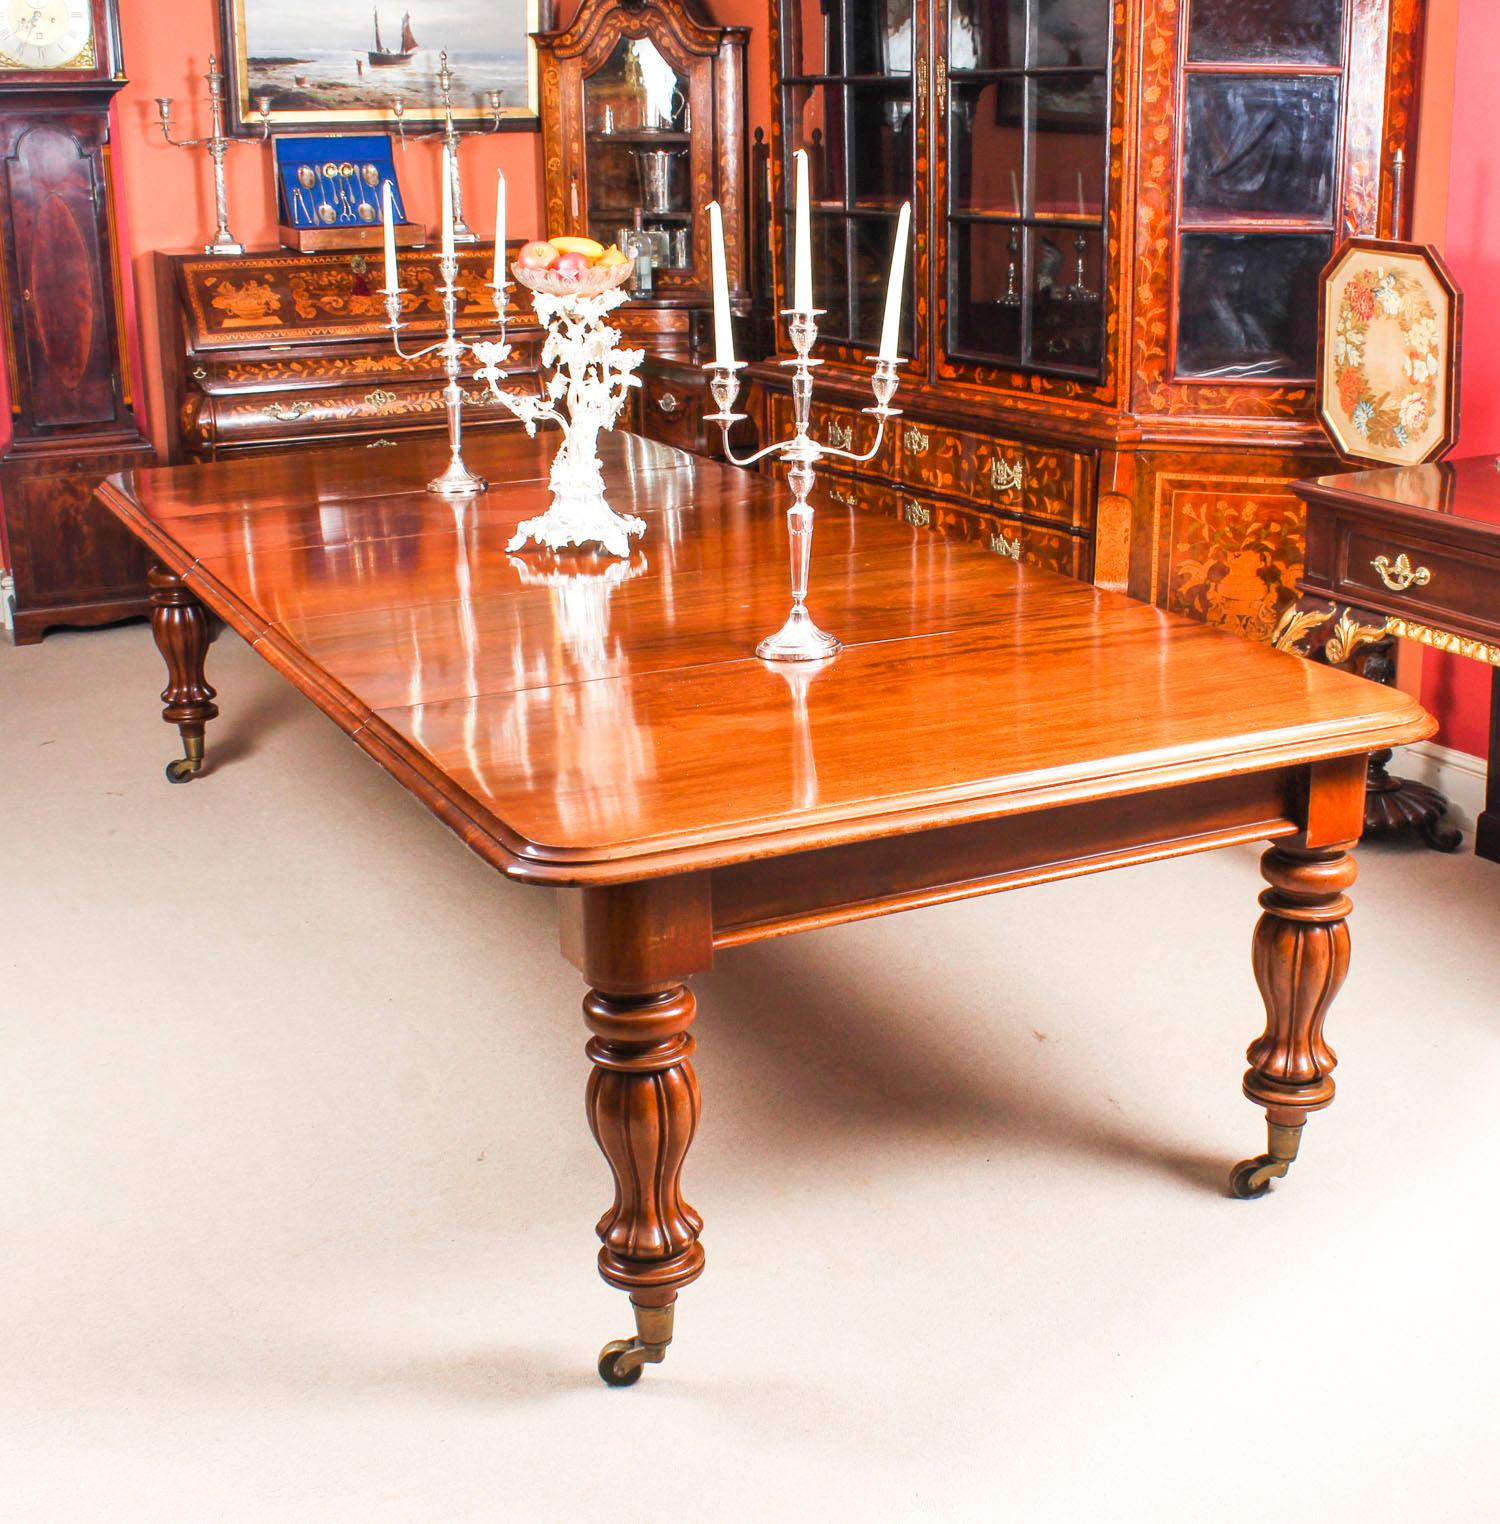 This is a beautiful antique early Victorian flame mahogany extending dining table, circa 1840 in date.

This amazing table can sit twelve people in comfort, has been handcrafted from solid mahogany which has a beautiful grain and is in really